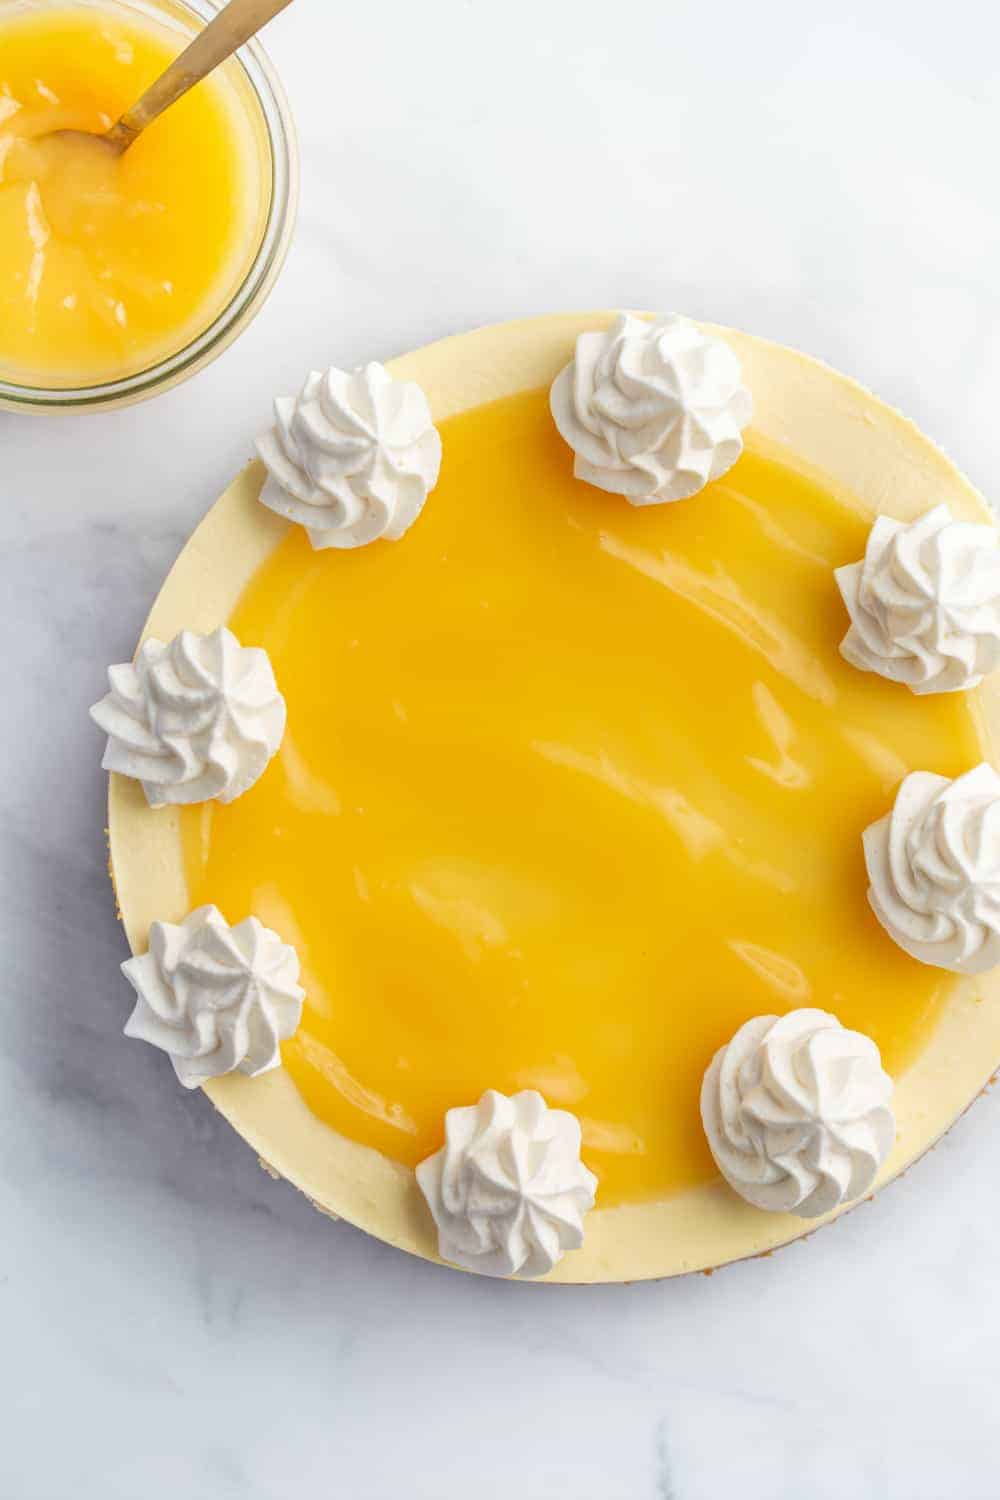 Overhead view of lemon cheesecake topped with lemon curd and whipped cream